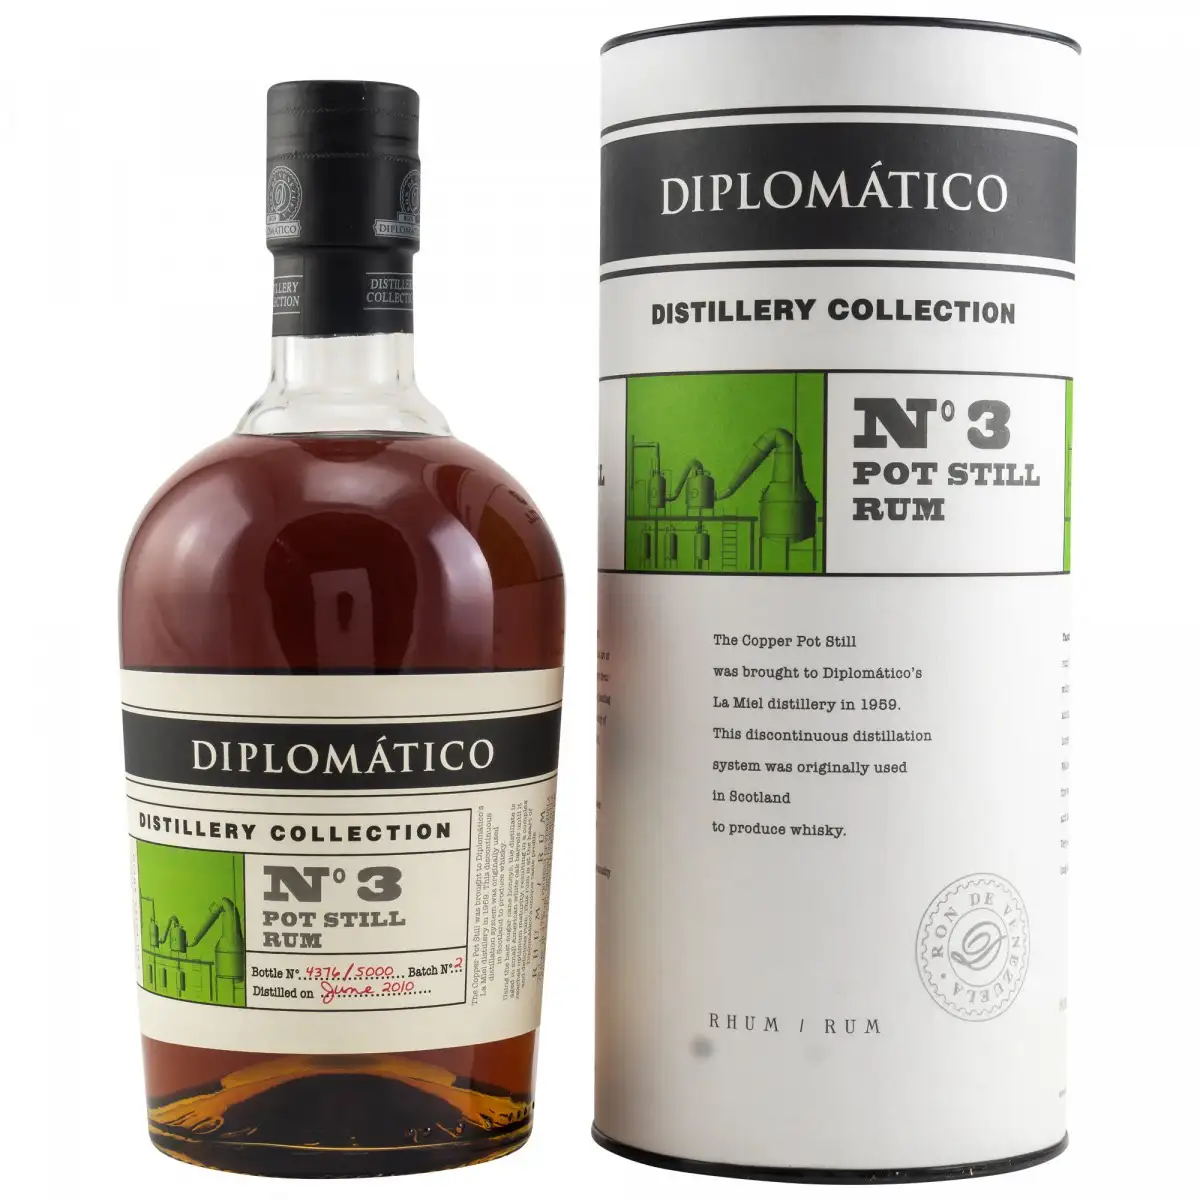 Image of the front of the bottle of the rum Diplomático / Botucal No. 3 Pot Still Rum